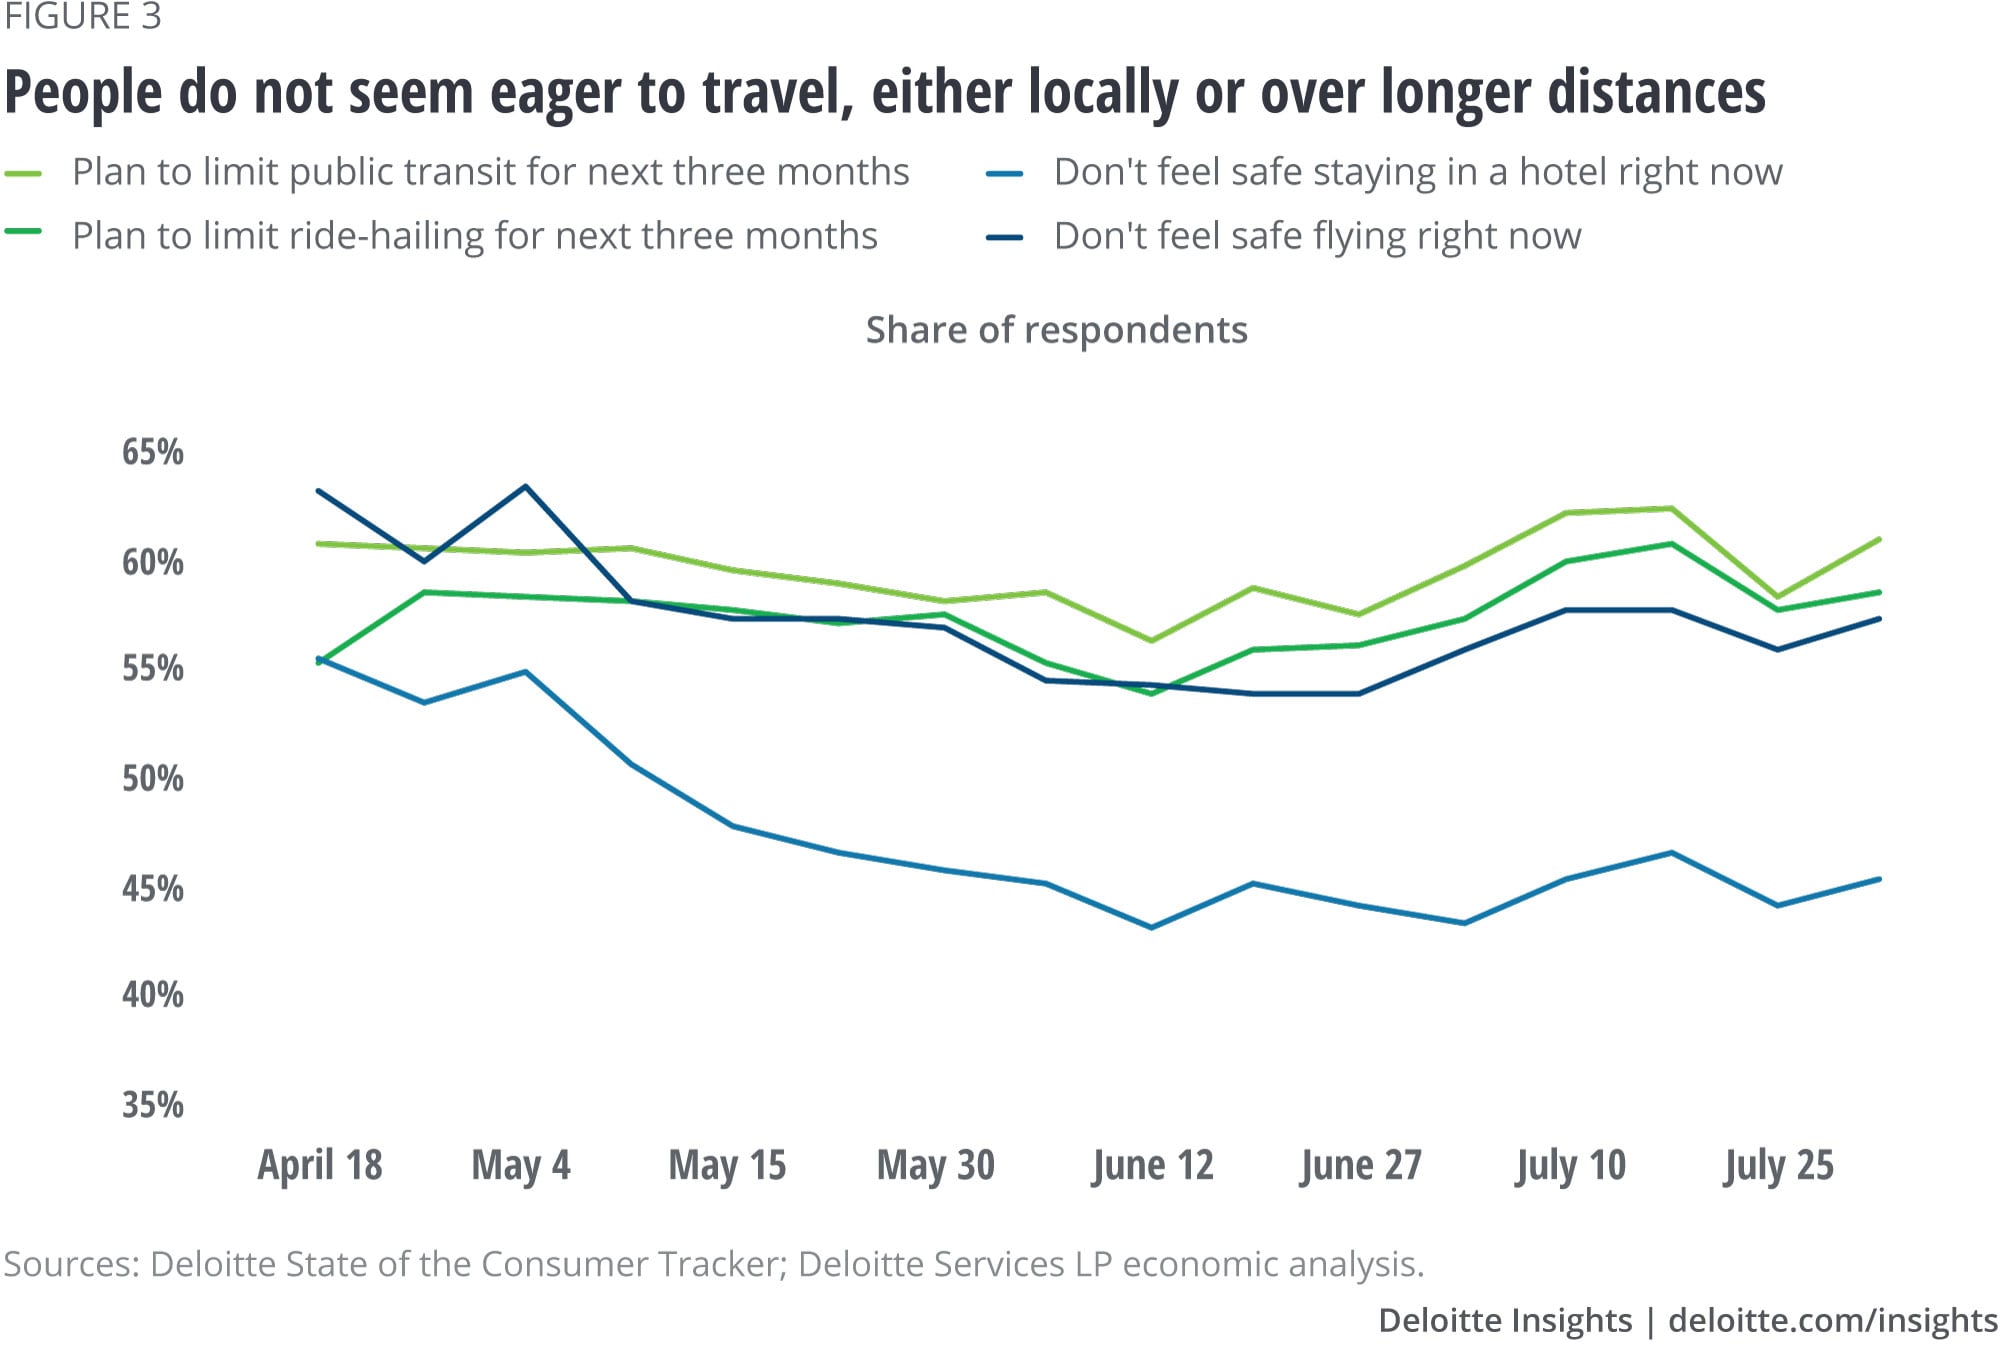 People do not seem eager to travel, either locally or over longer distances